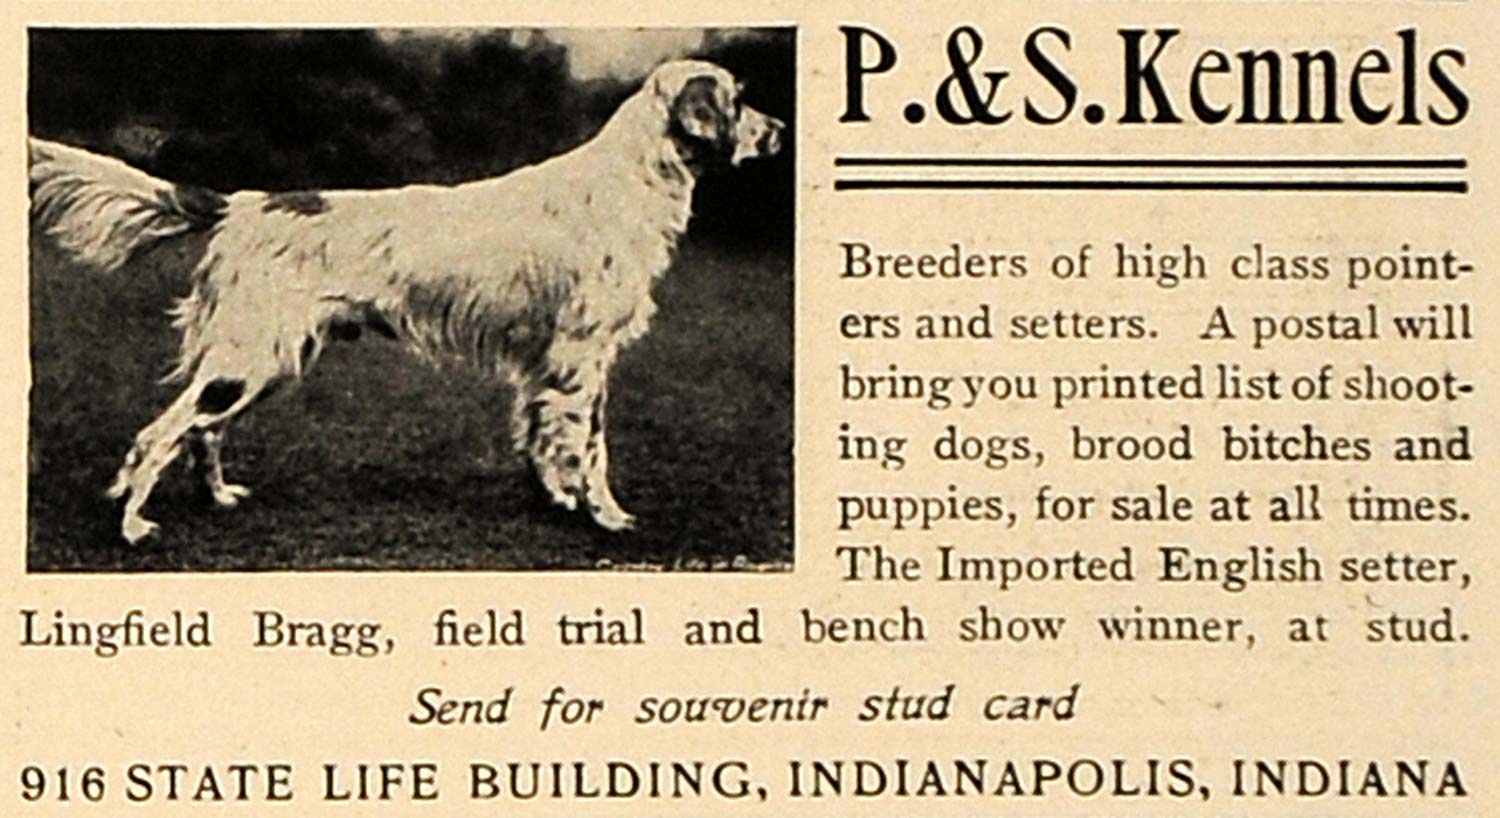 1905 Ad P & S Kennels Breeders Pointers Setters Dogs - ORIGINAL ADVERTISING CL7